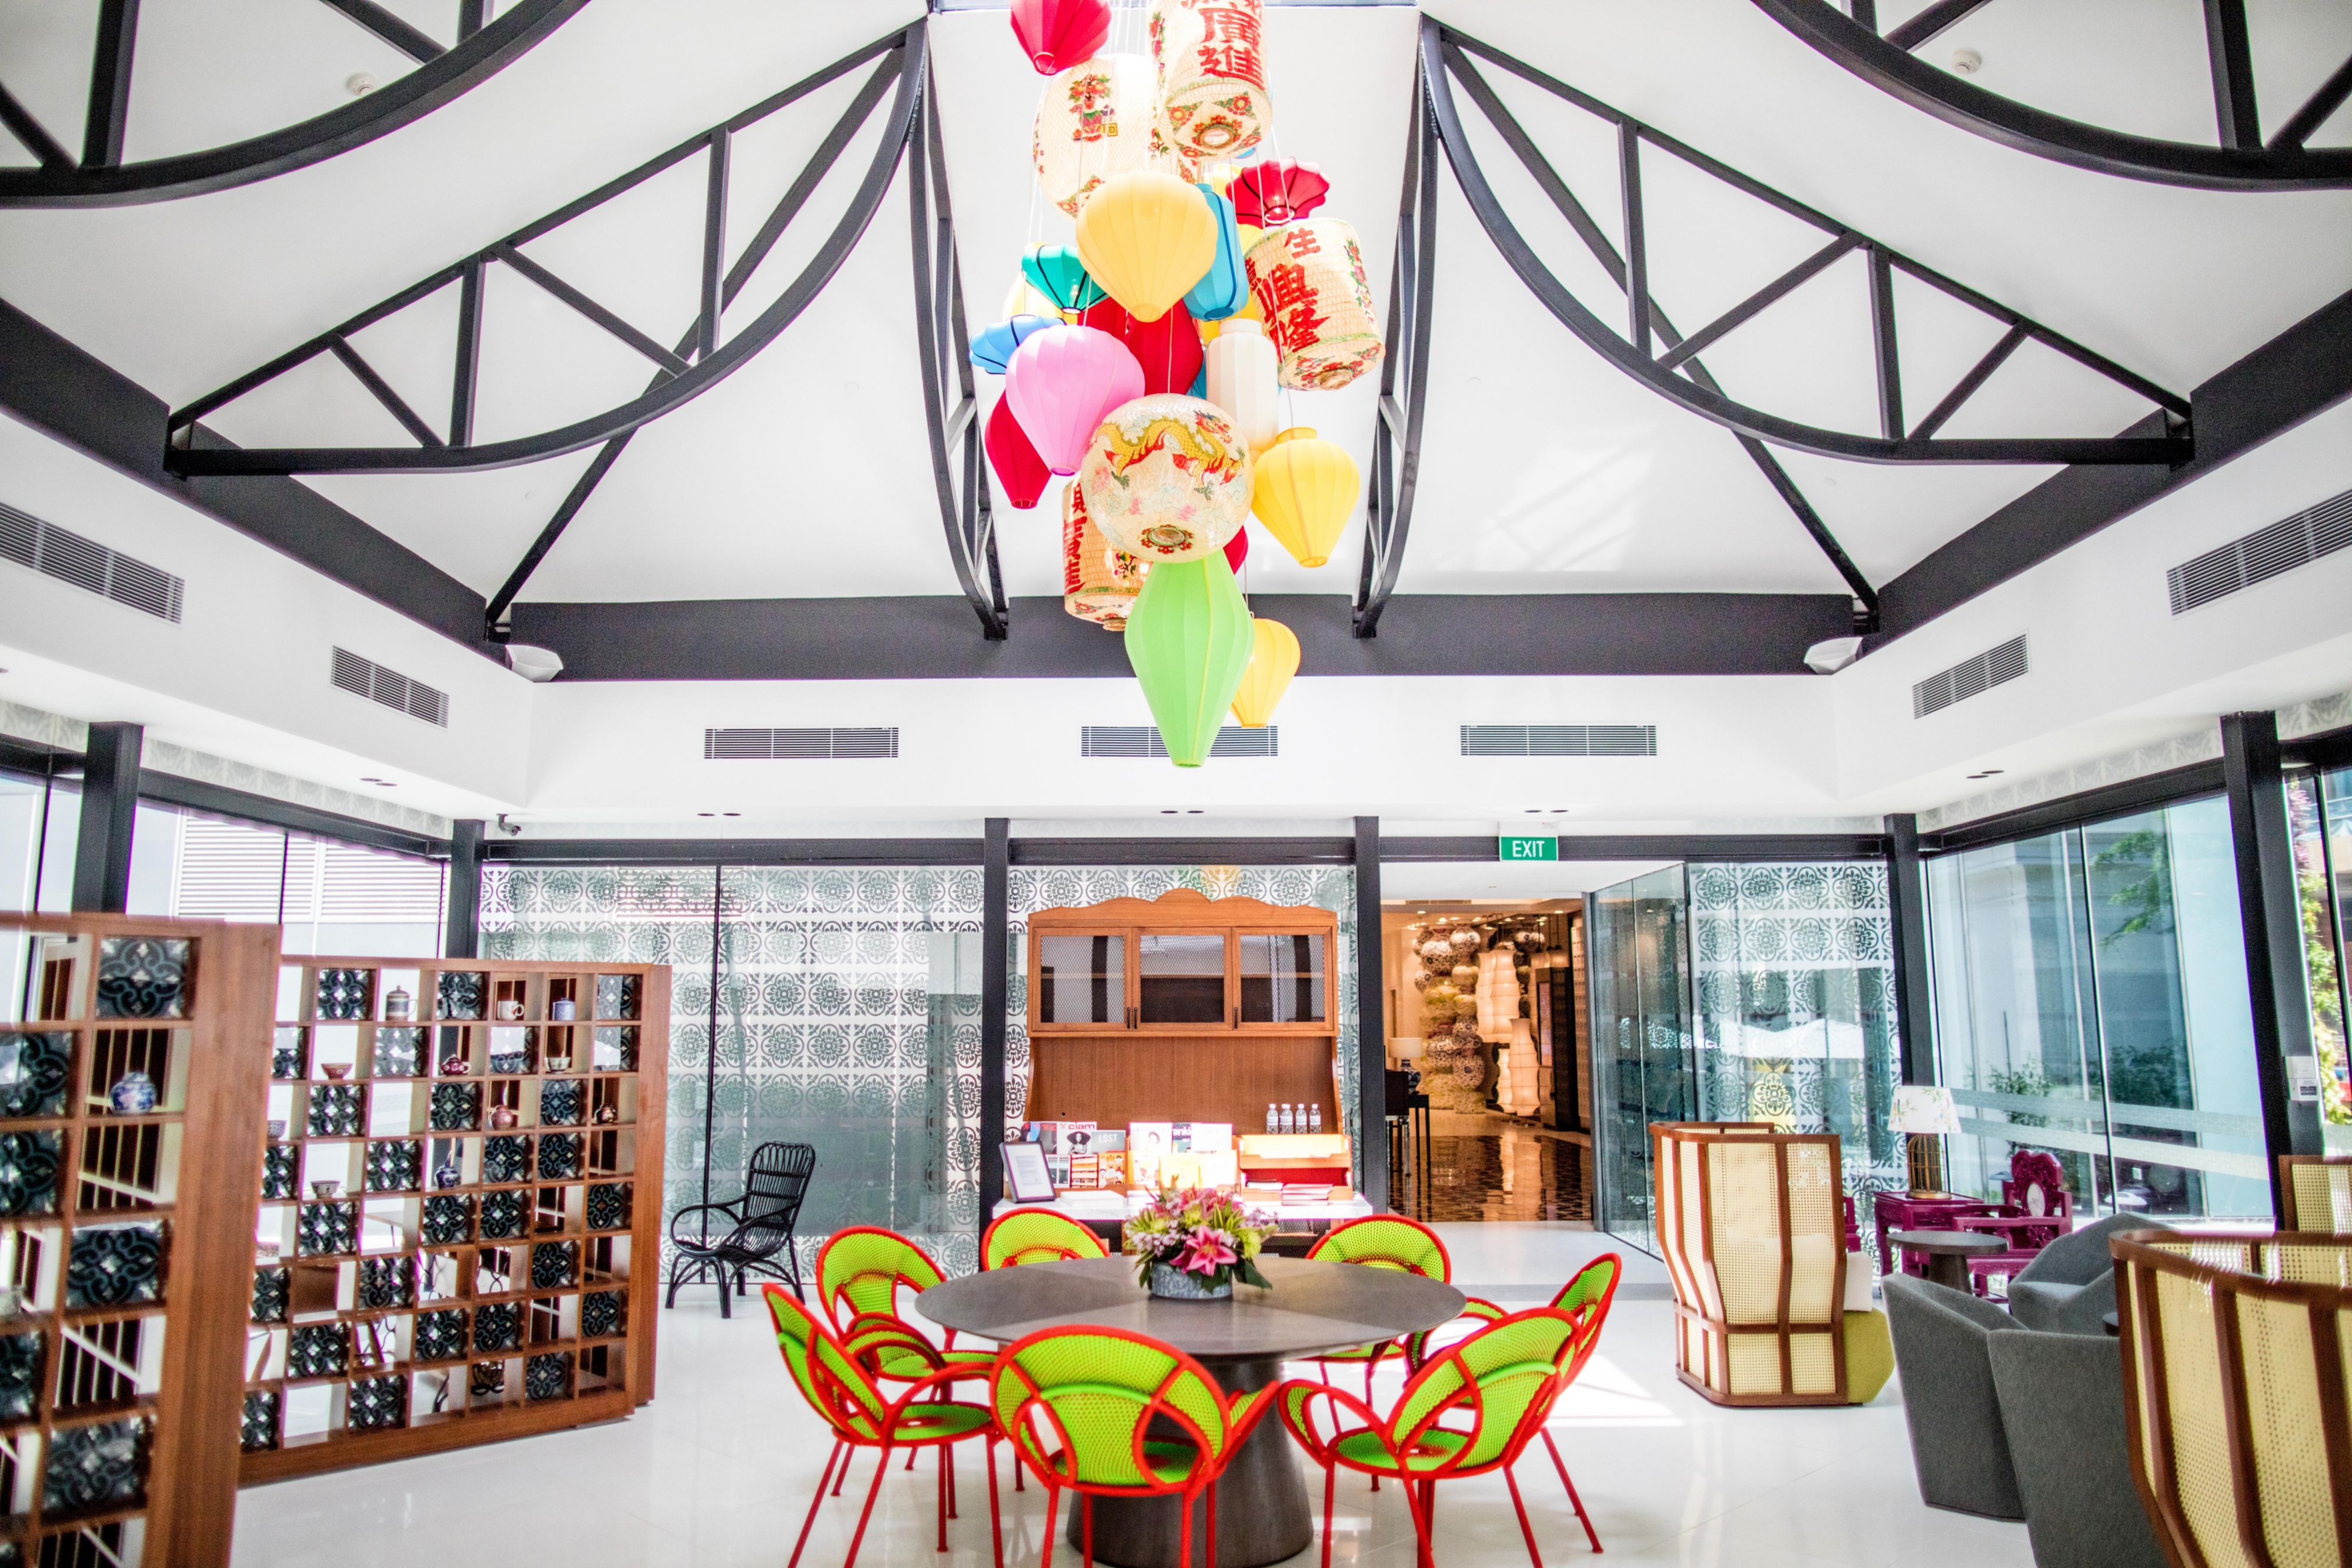 Step into our vibrant Pavilion and enjoy the natural sunlight, a high ceiling and vibrant designs that incorporates the colourful charm of the surrounding Katong neighbourhood. From a Mama Stall to Mac desktops, architectural motifs to old-school games, be surprised at our electric Pavilion.